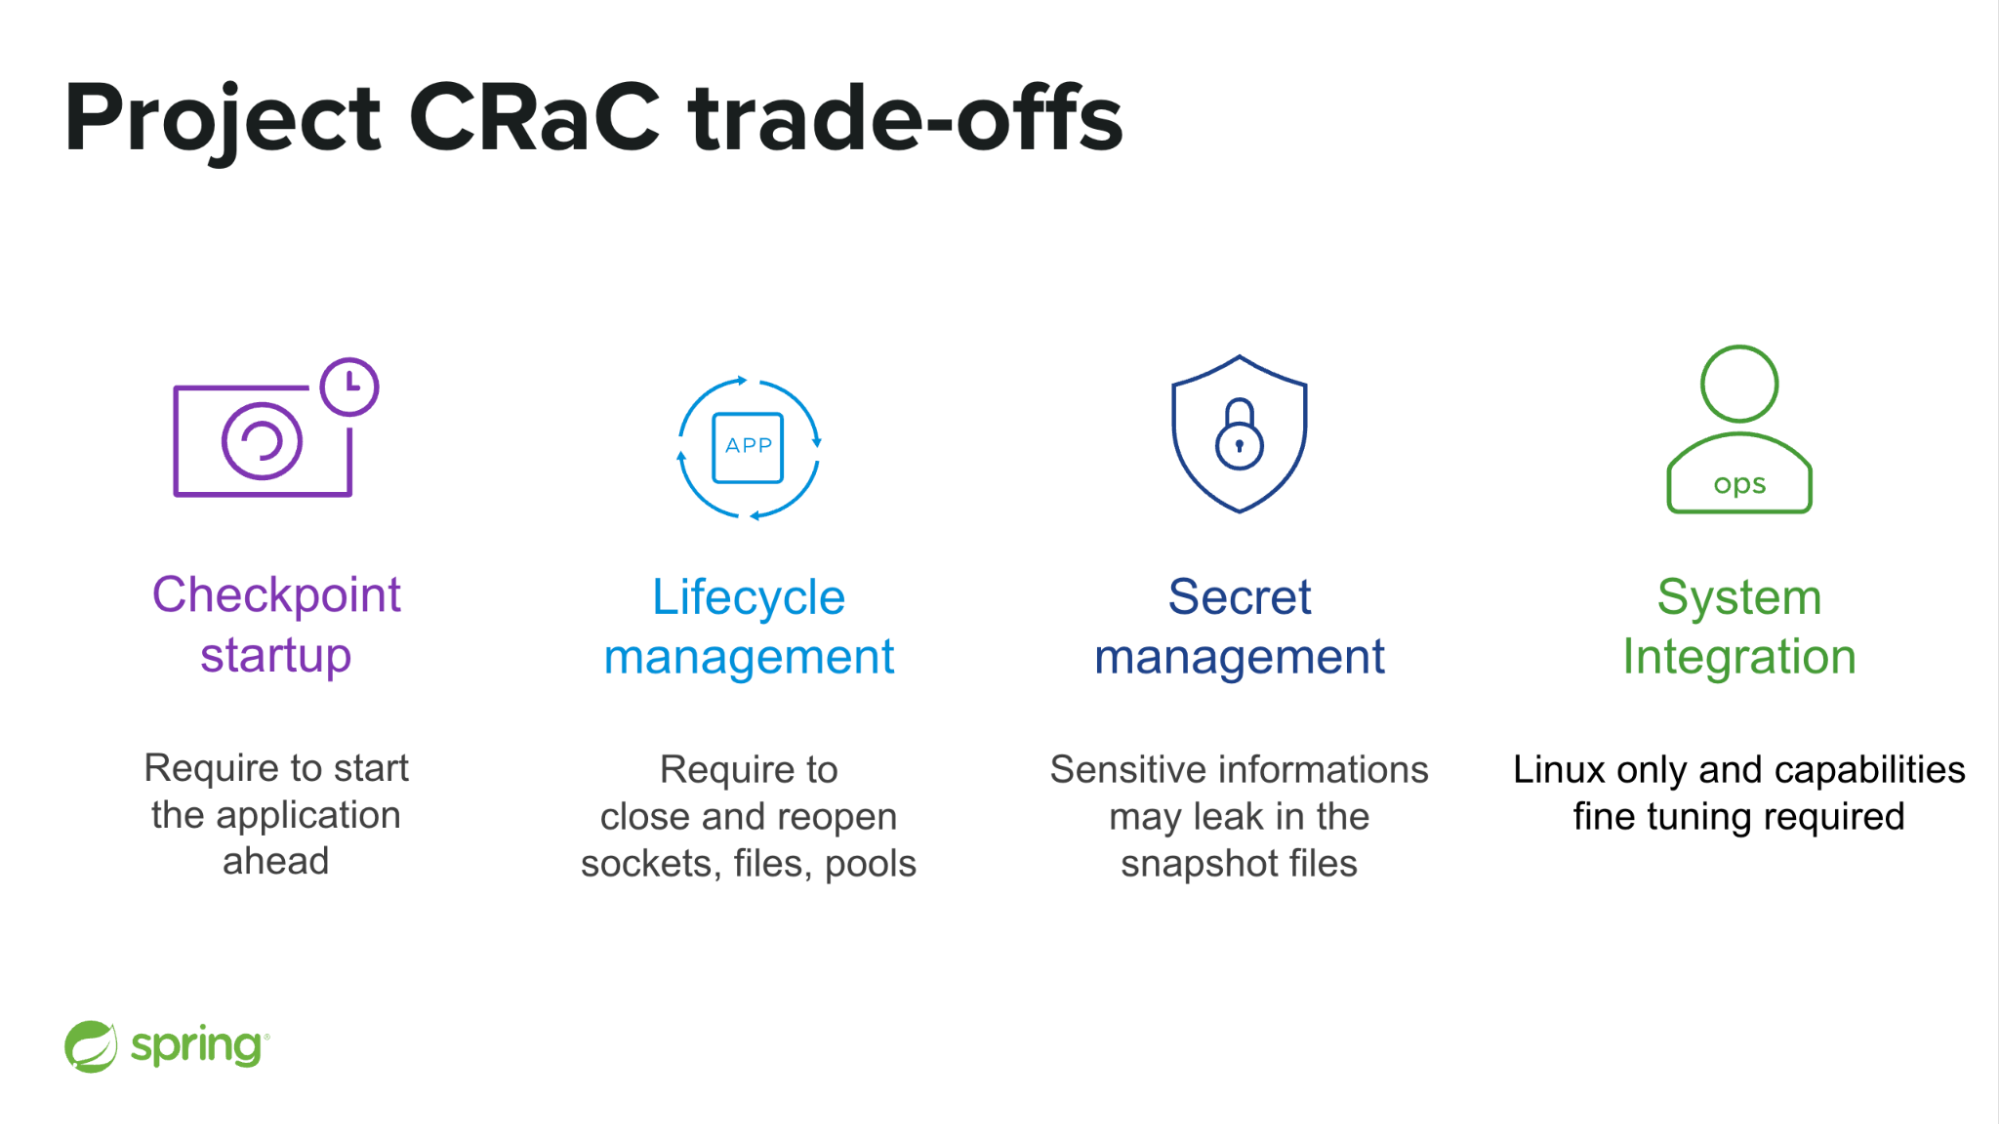 Project CRaC trade-offs